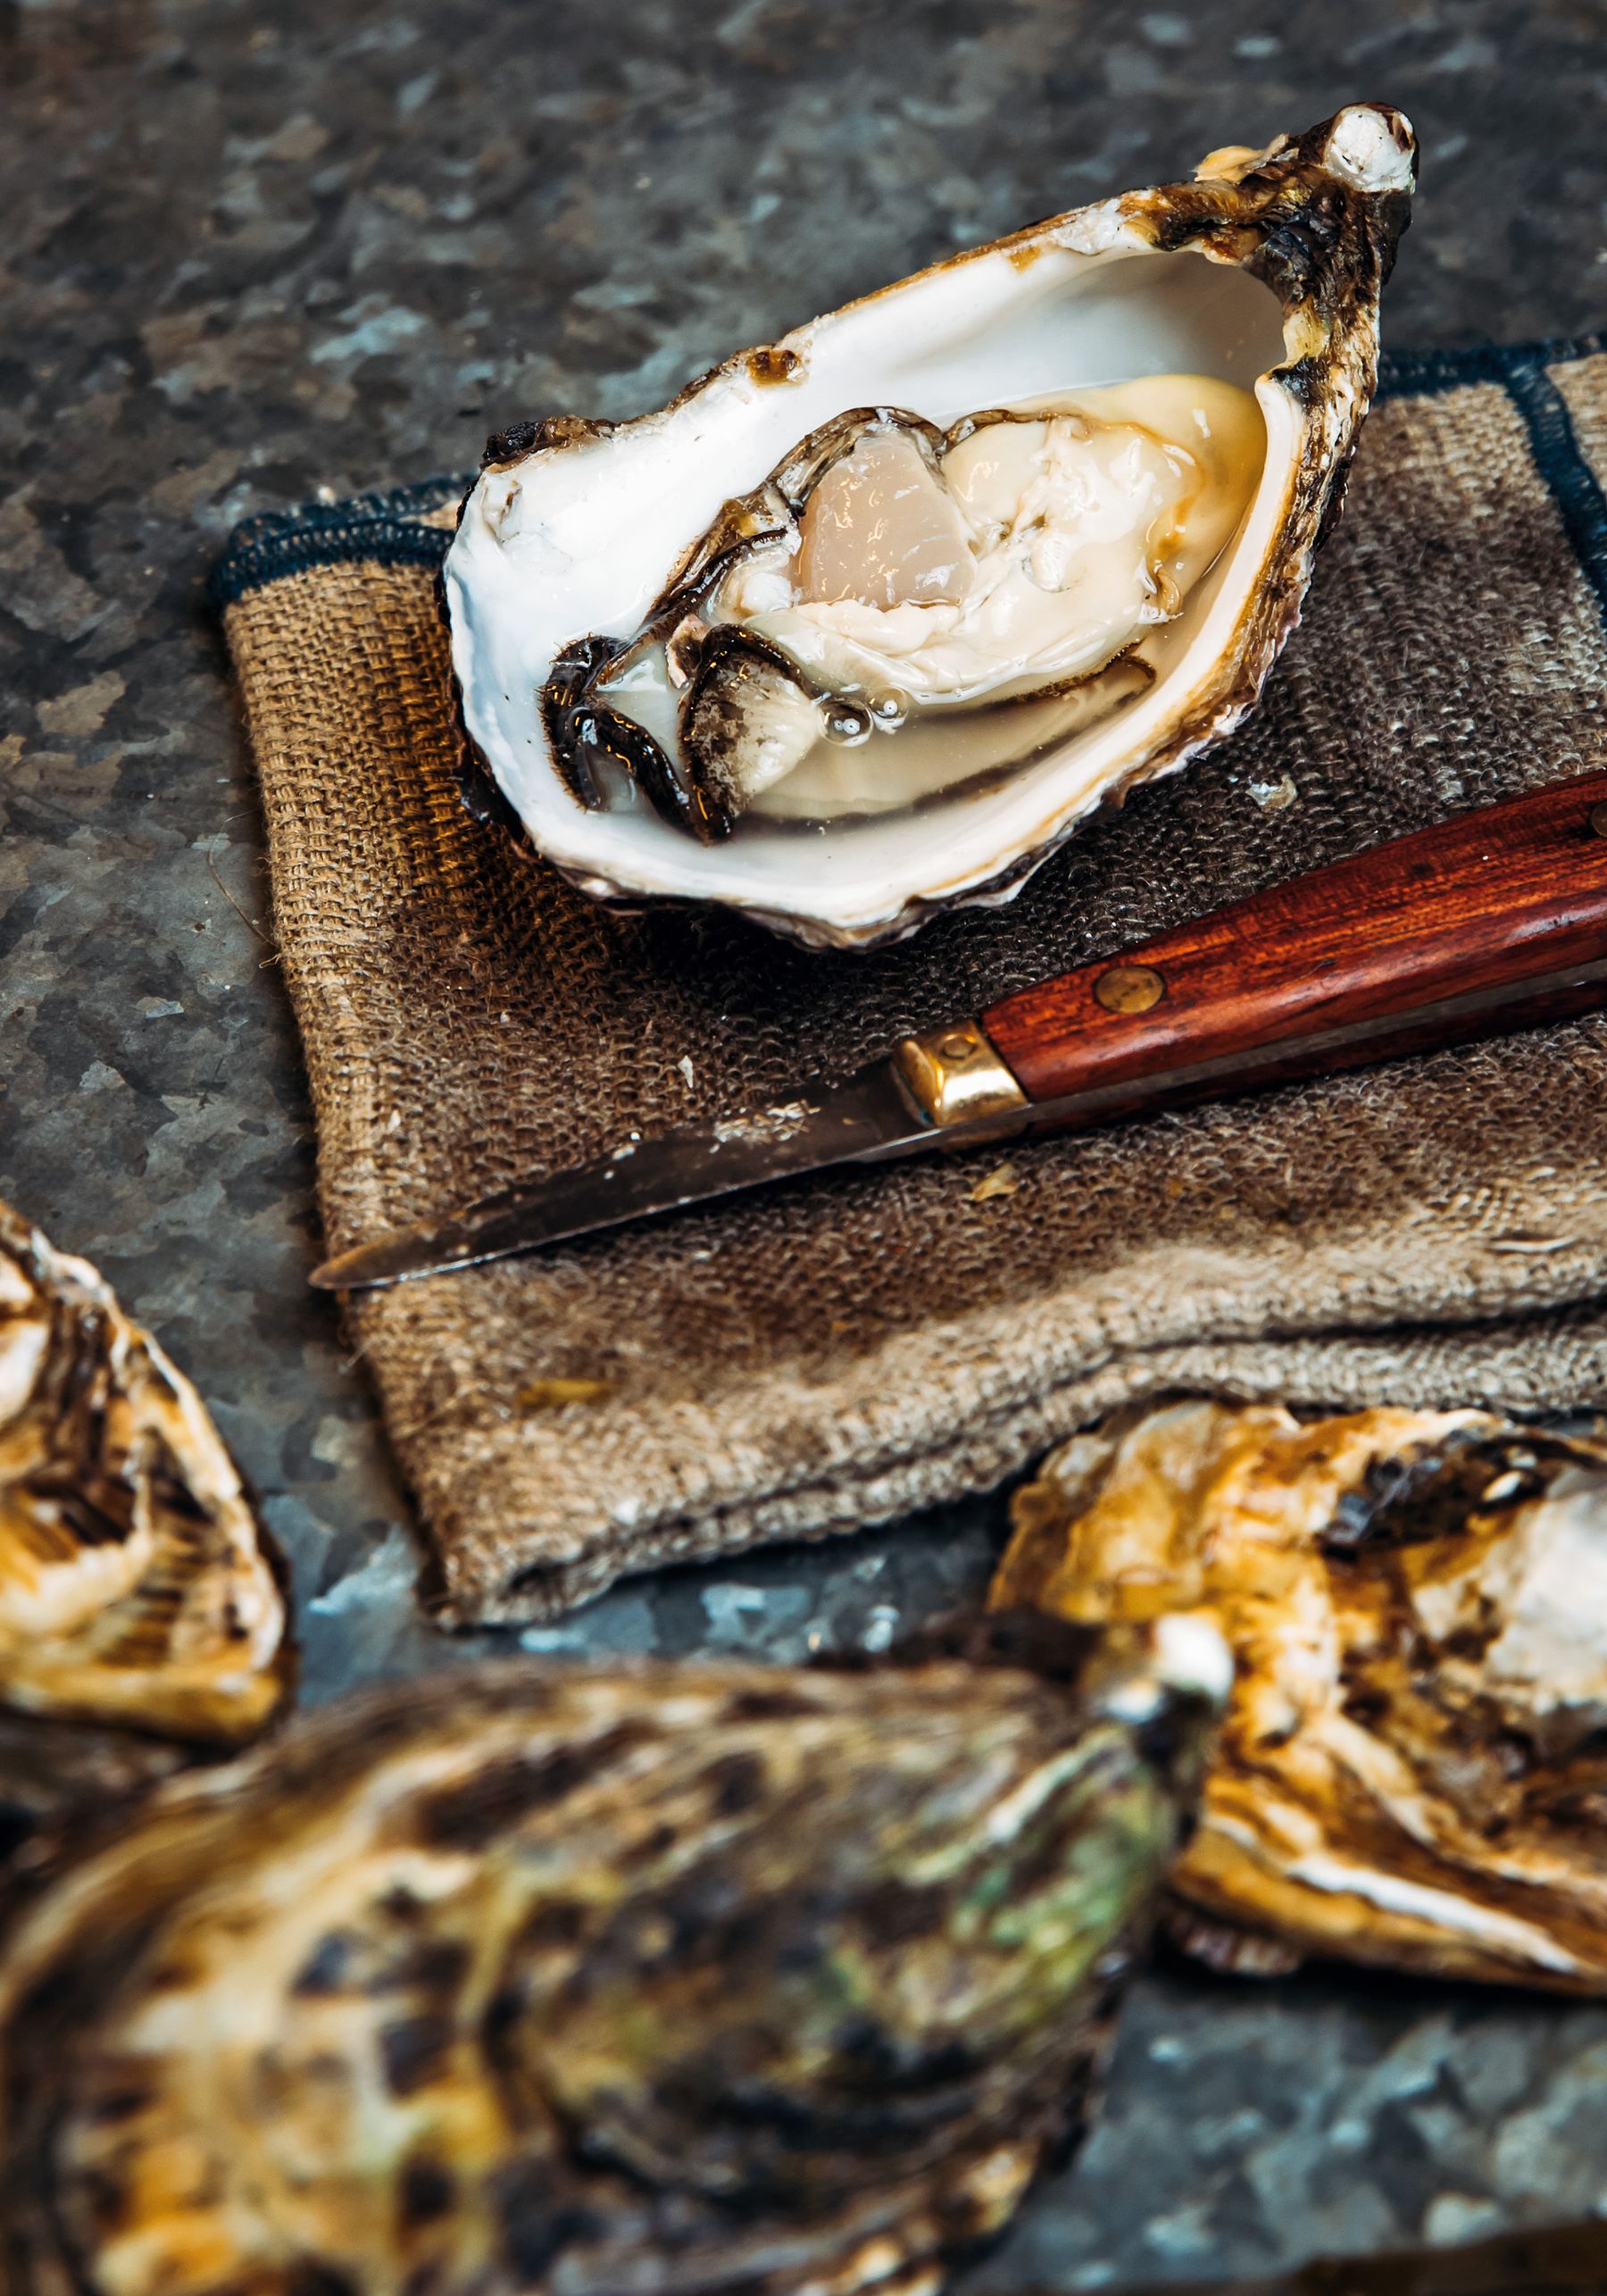 Shuck Me that’s a Good Oyster – Four Recipes to Try on World Oyster Day.